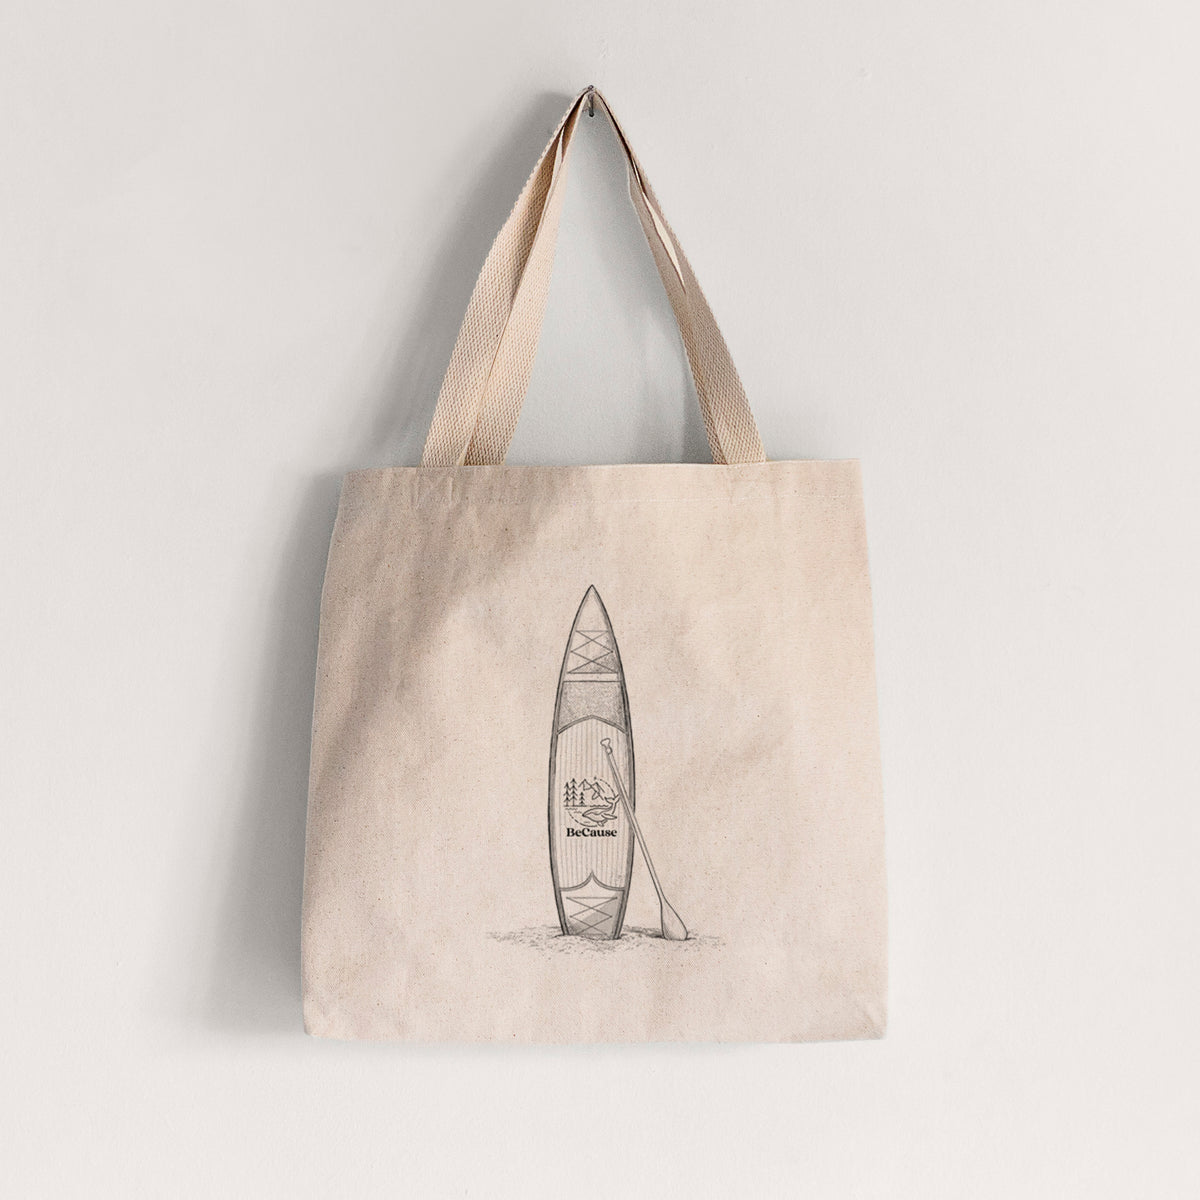 Stand-up Paddle Board - Tote Bag